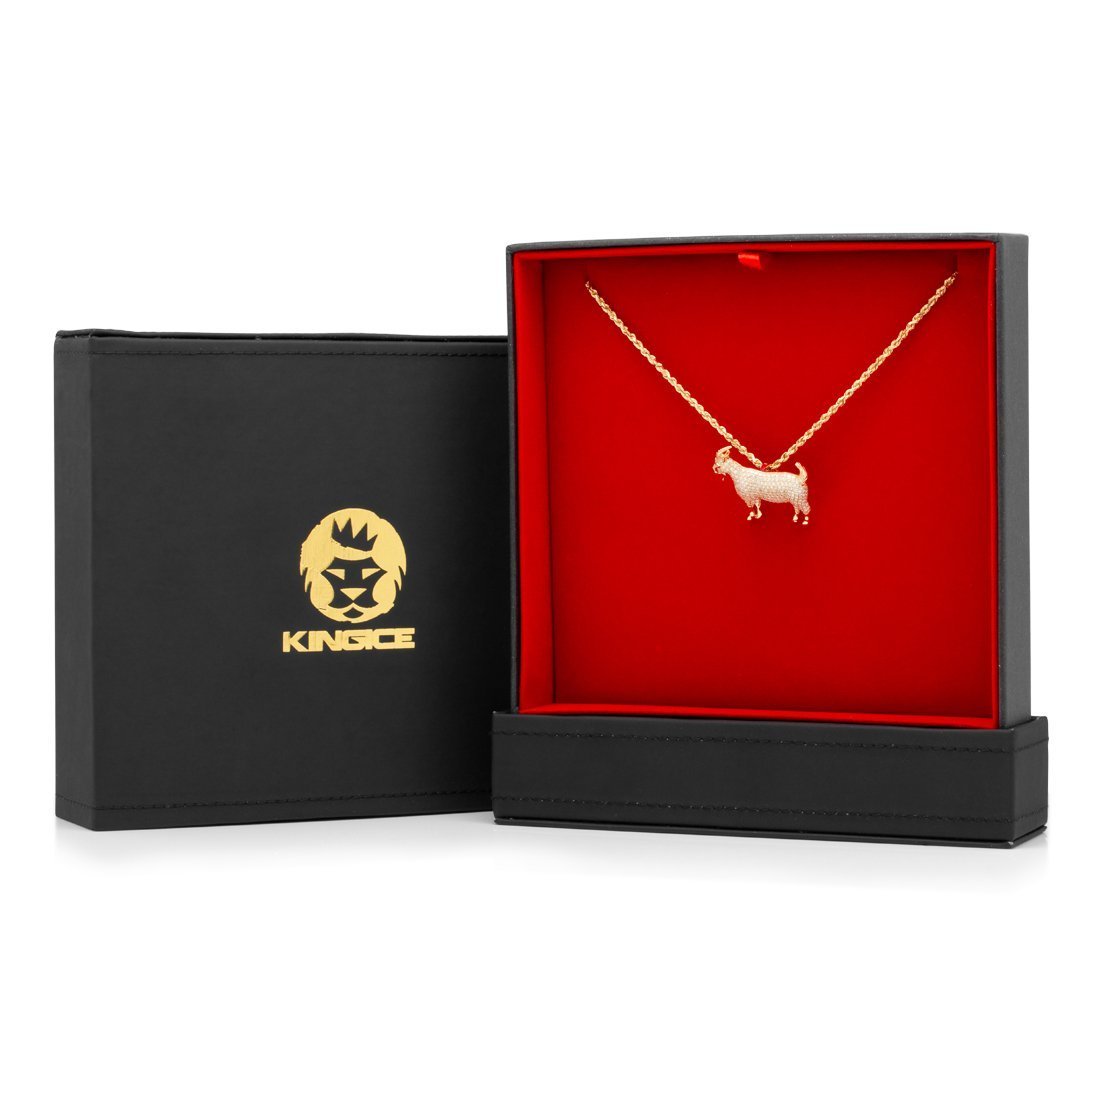 Notorious B.I.G. x King Ice - 14K Solid Gold Diamond G.O.A.T. Necklace